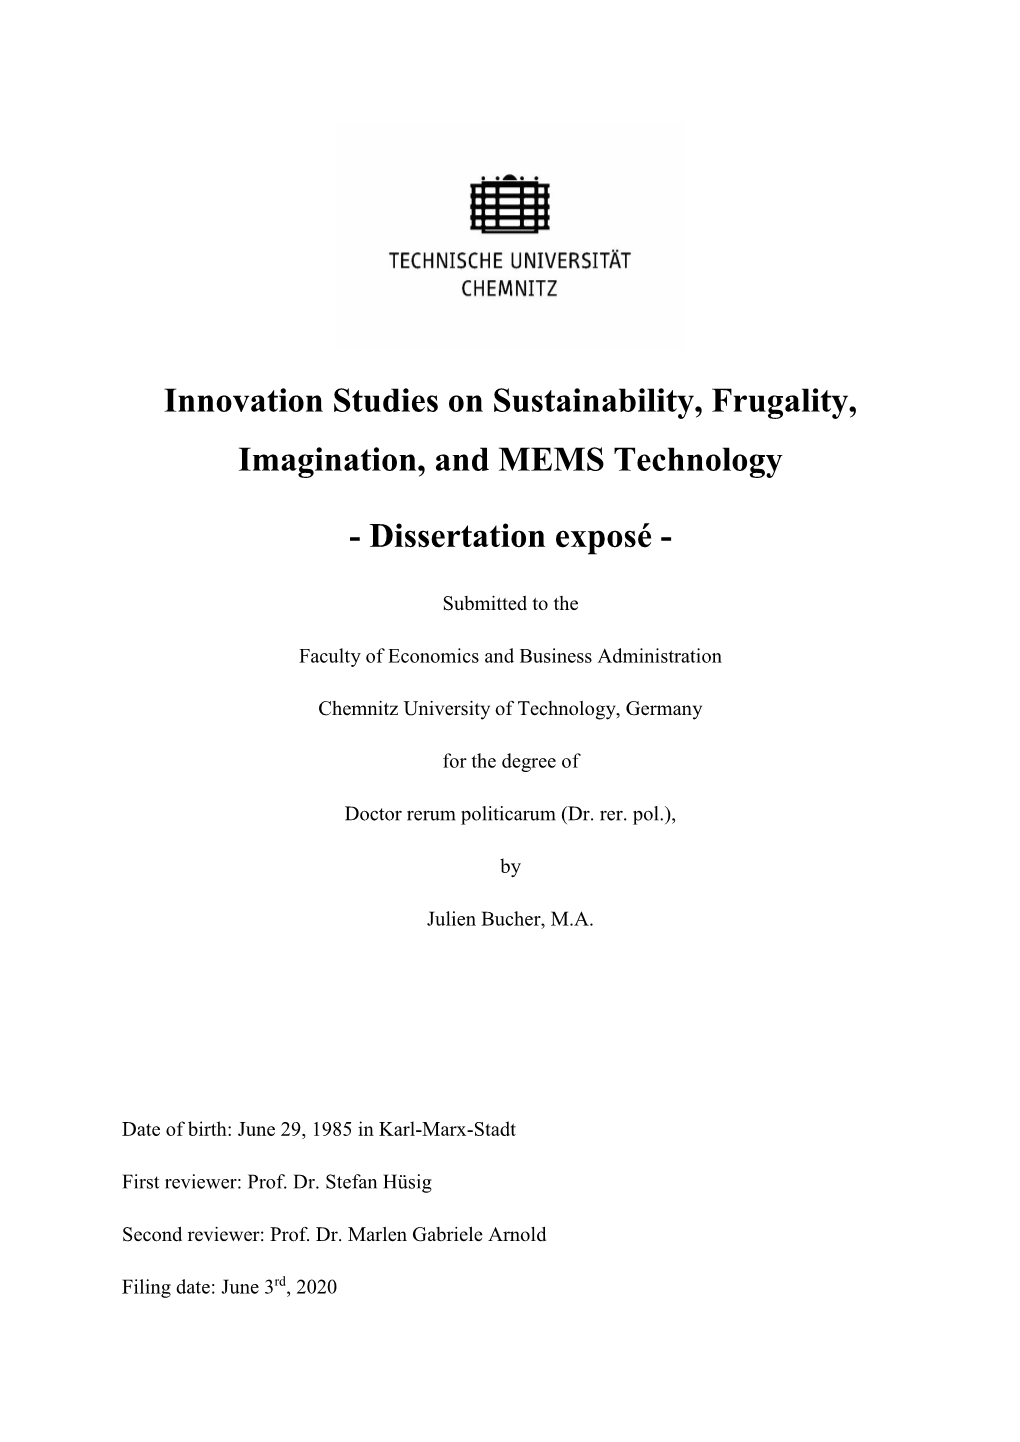 Innovation Studies on Sustainability, Frugality, Imagination, and MEMS Technology